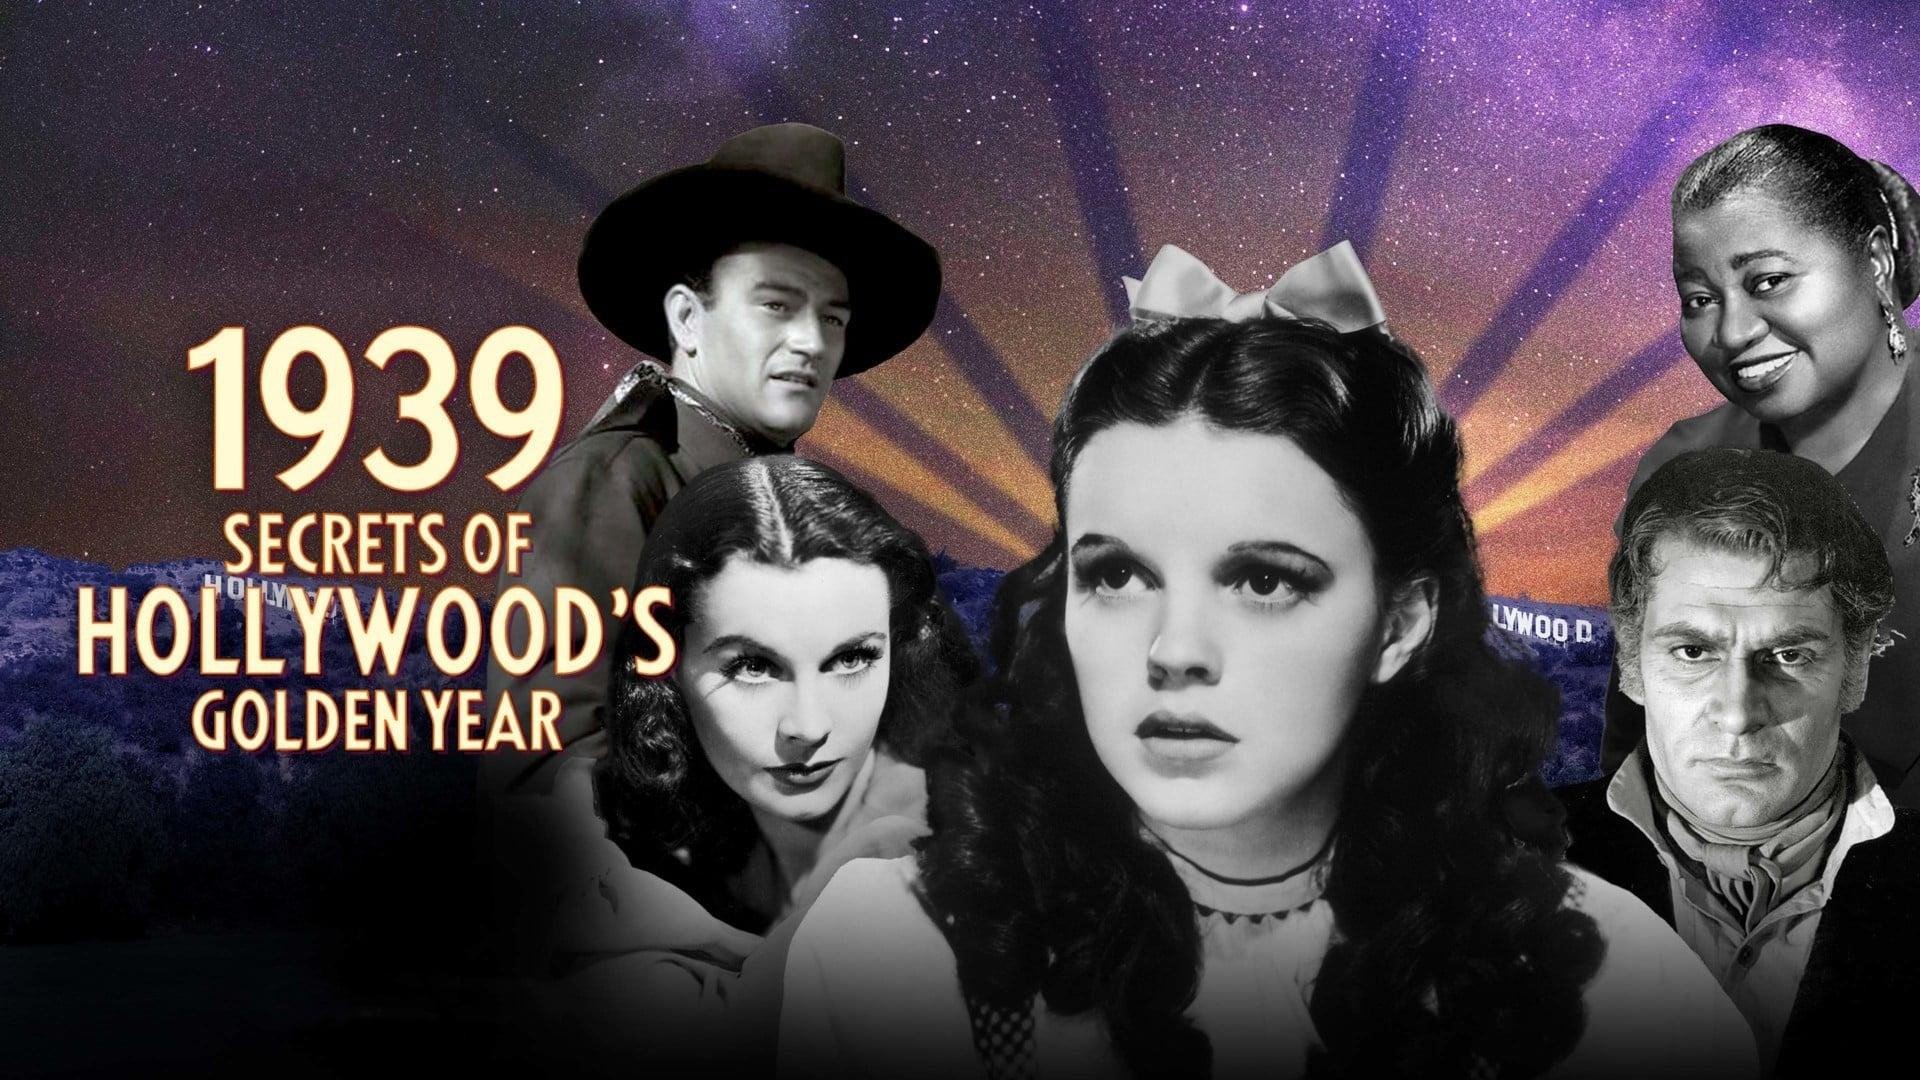 1939: Secrets of Hollywood's Golden Year backdrop